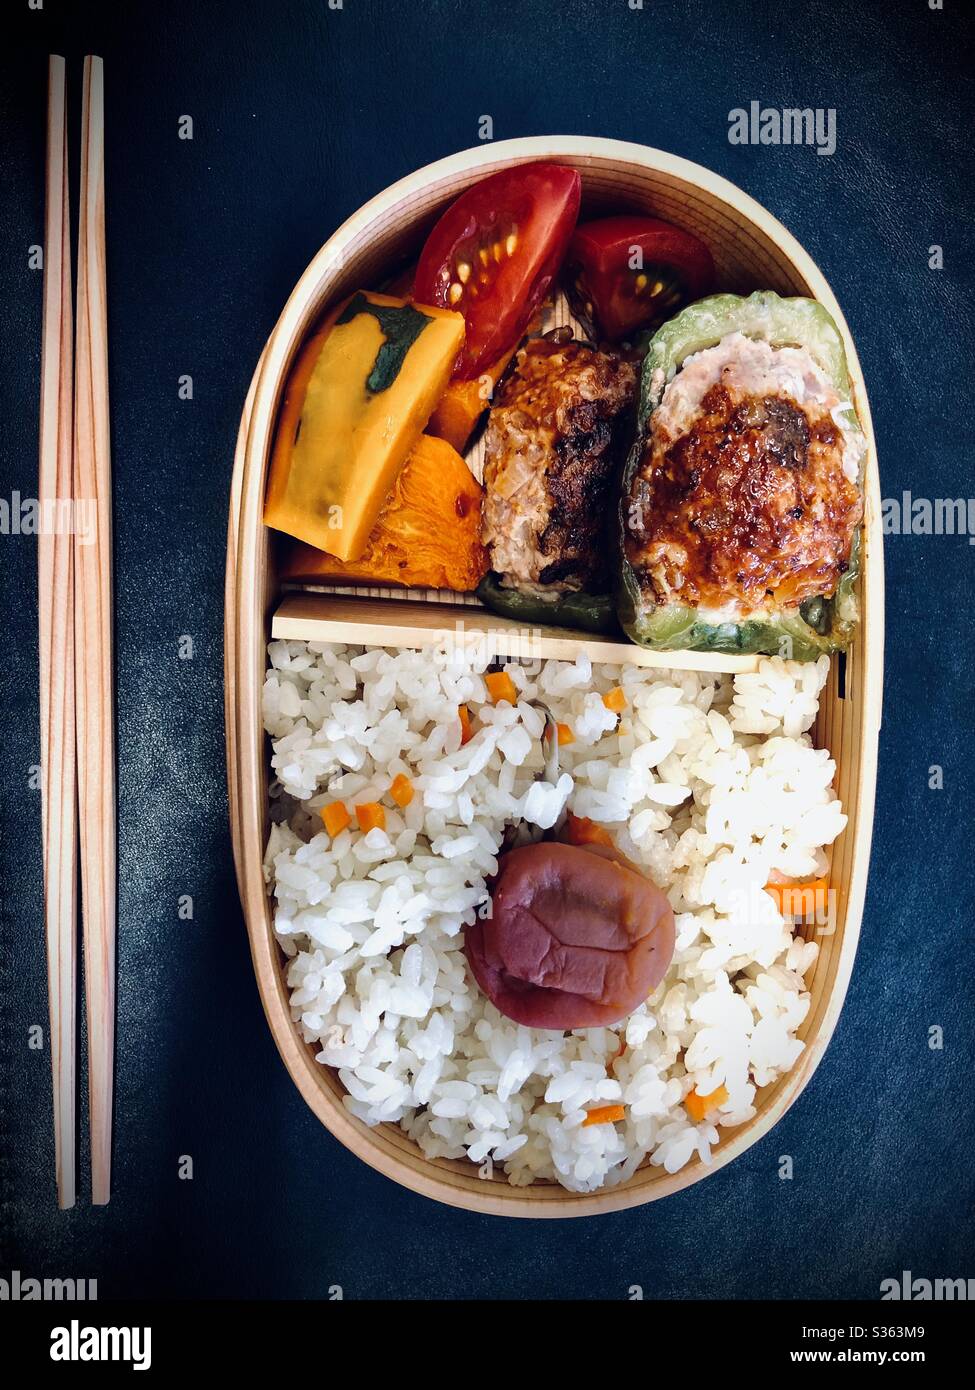 https://c8.alamy.com/comp/S363M9/homemade-lunch-with-minced-meat-stuffed-peppers-pumpkin-tomatoes-umeboshi-and-rice-in-a-magewappa-bento-box-S363M9.jpg